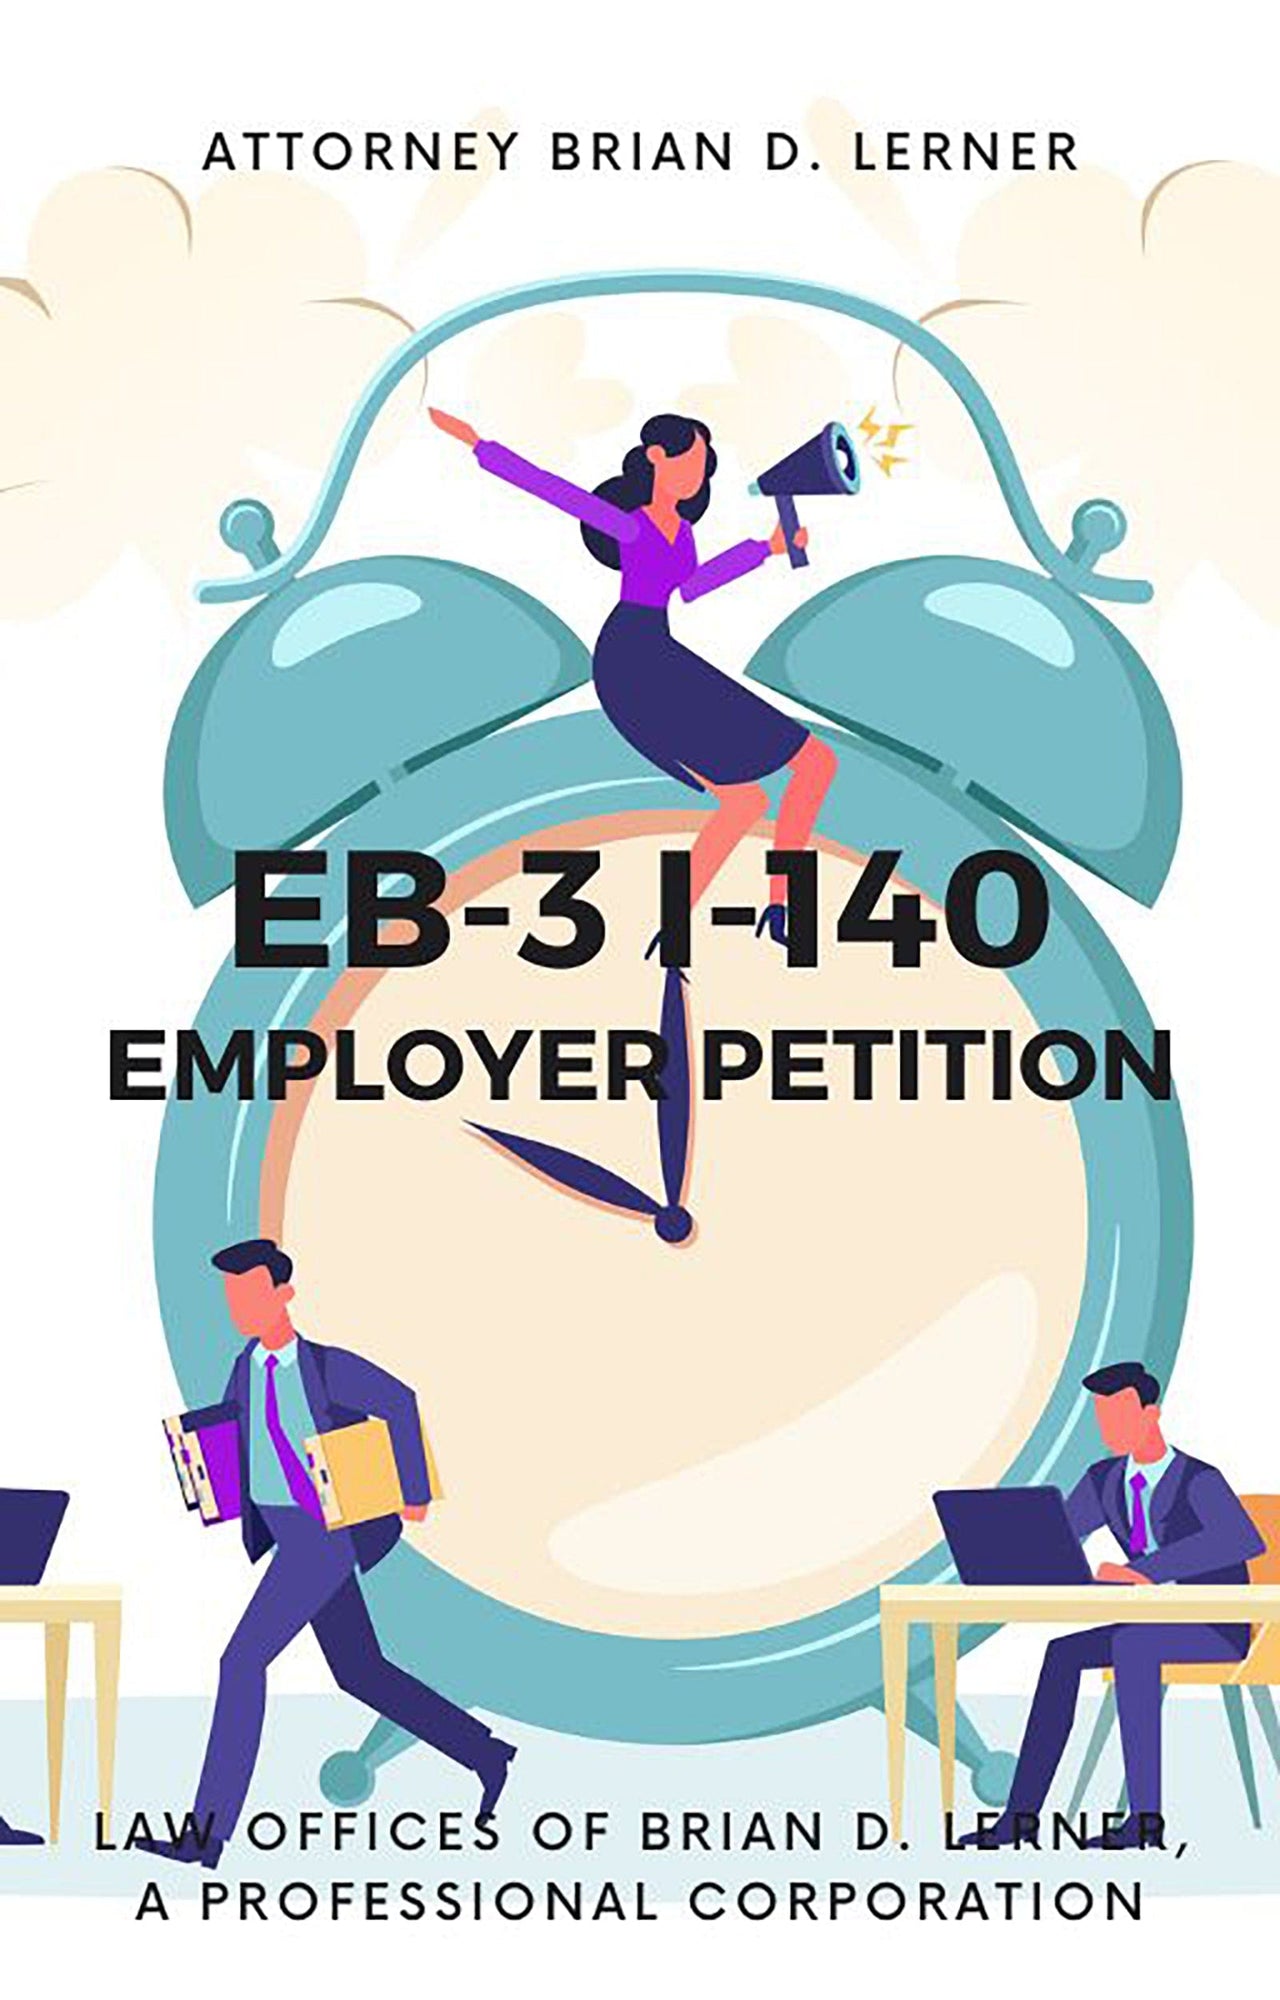 Rocket Immigration Petitions Immigration Visa EB-3 I-140 Employer Petition